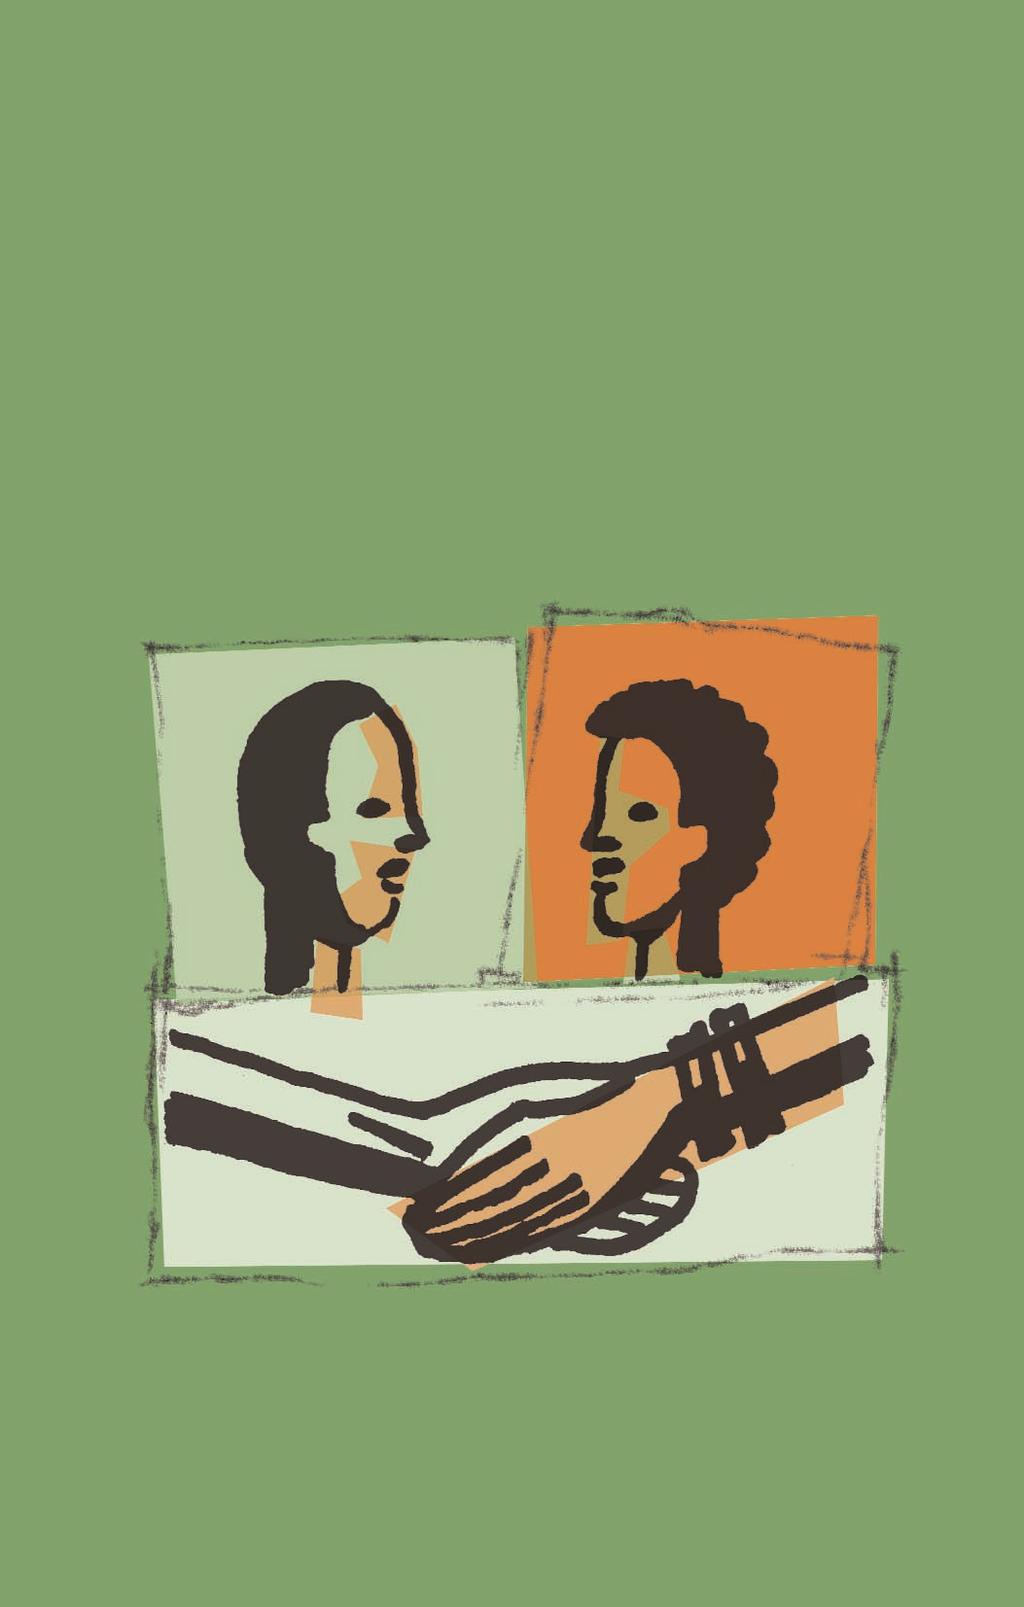 Youth in Sub-Saharan Africa: A CHARTBOOK ON SEXUAL